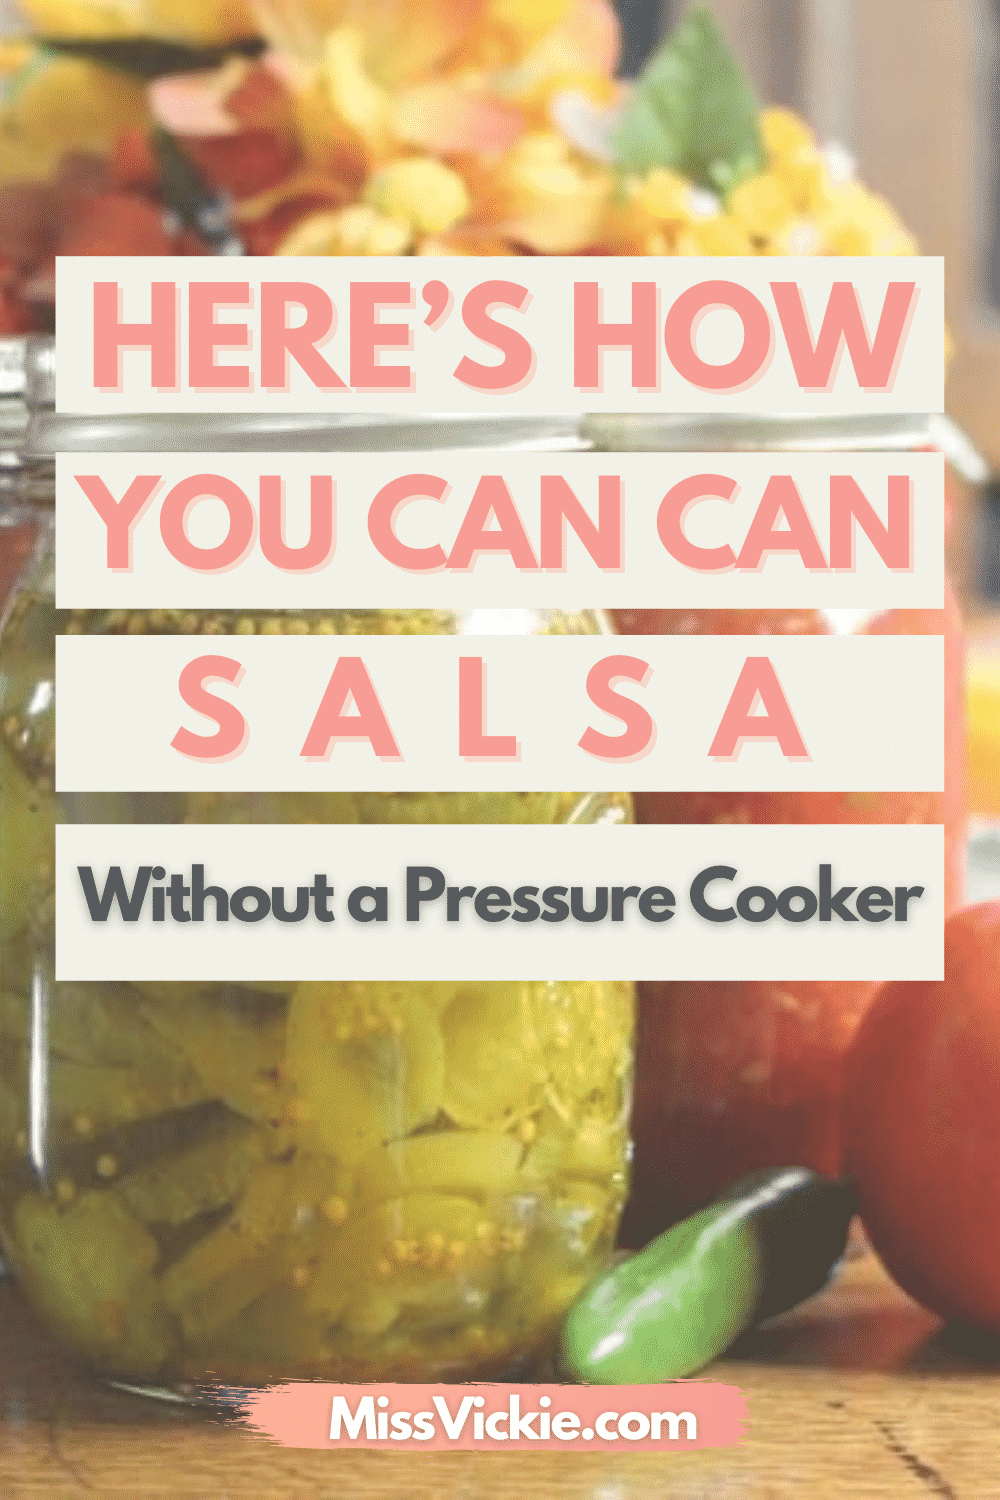 Here S How You Can Can Salsa Without A Pressure Cooker Miss Vickie